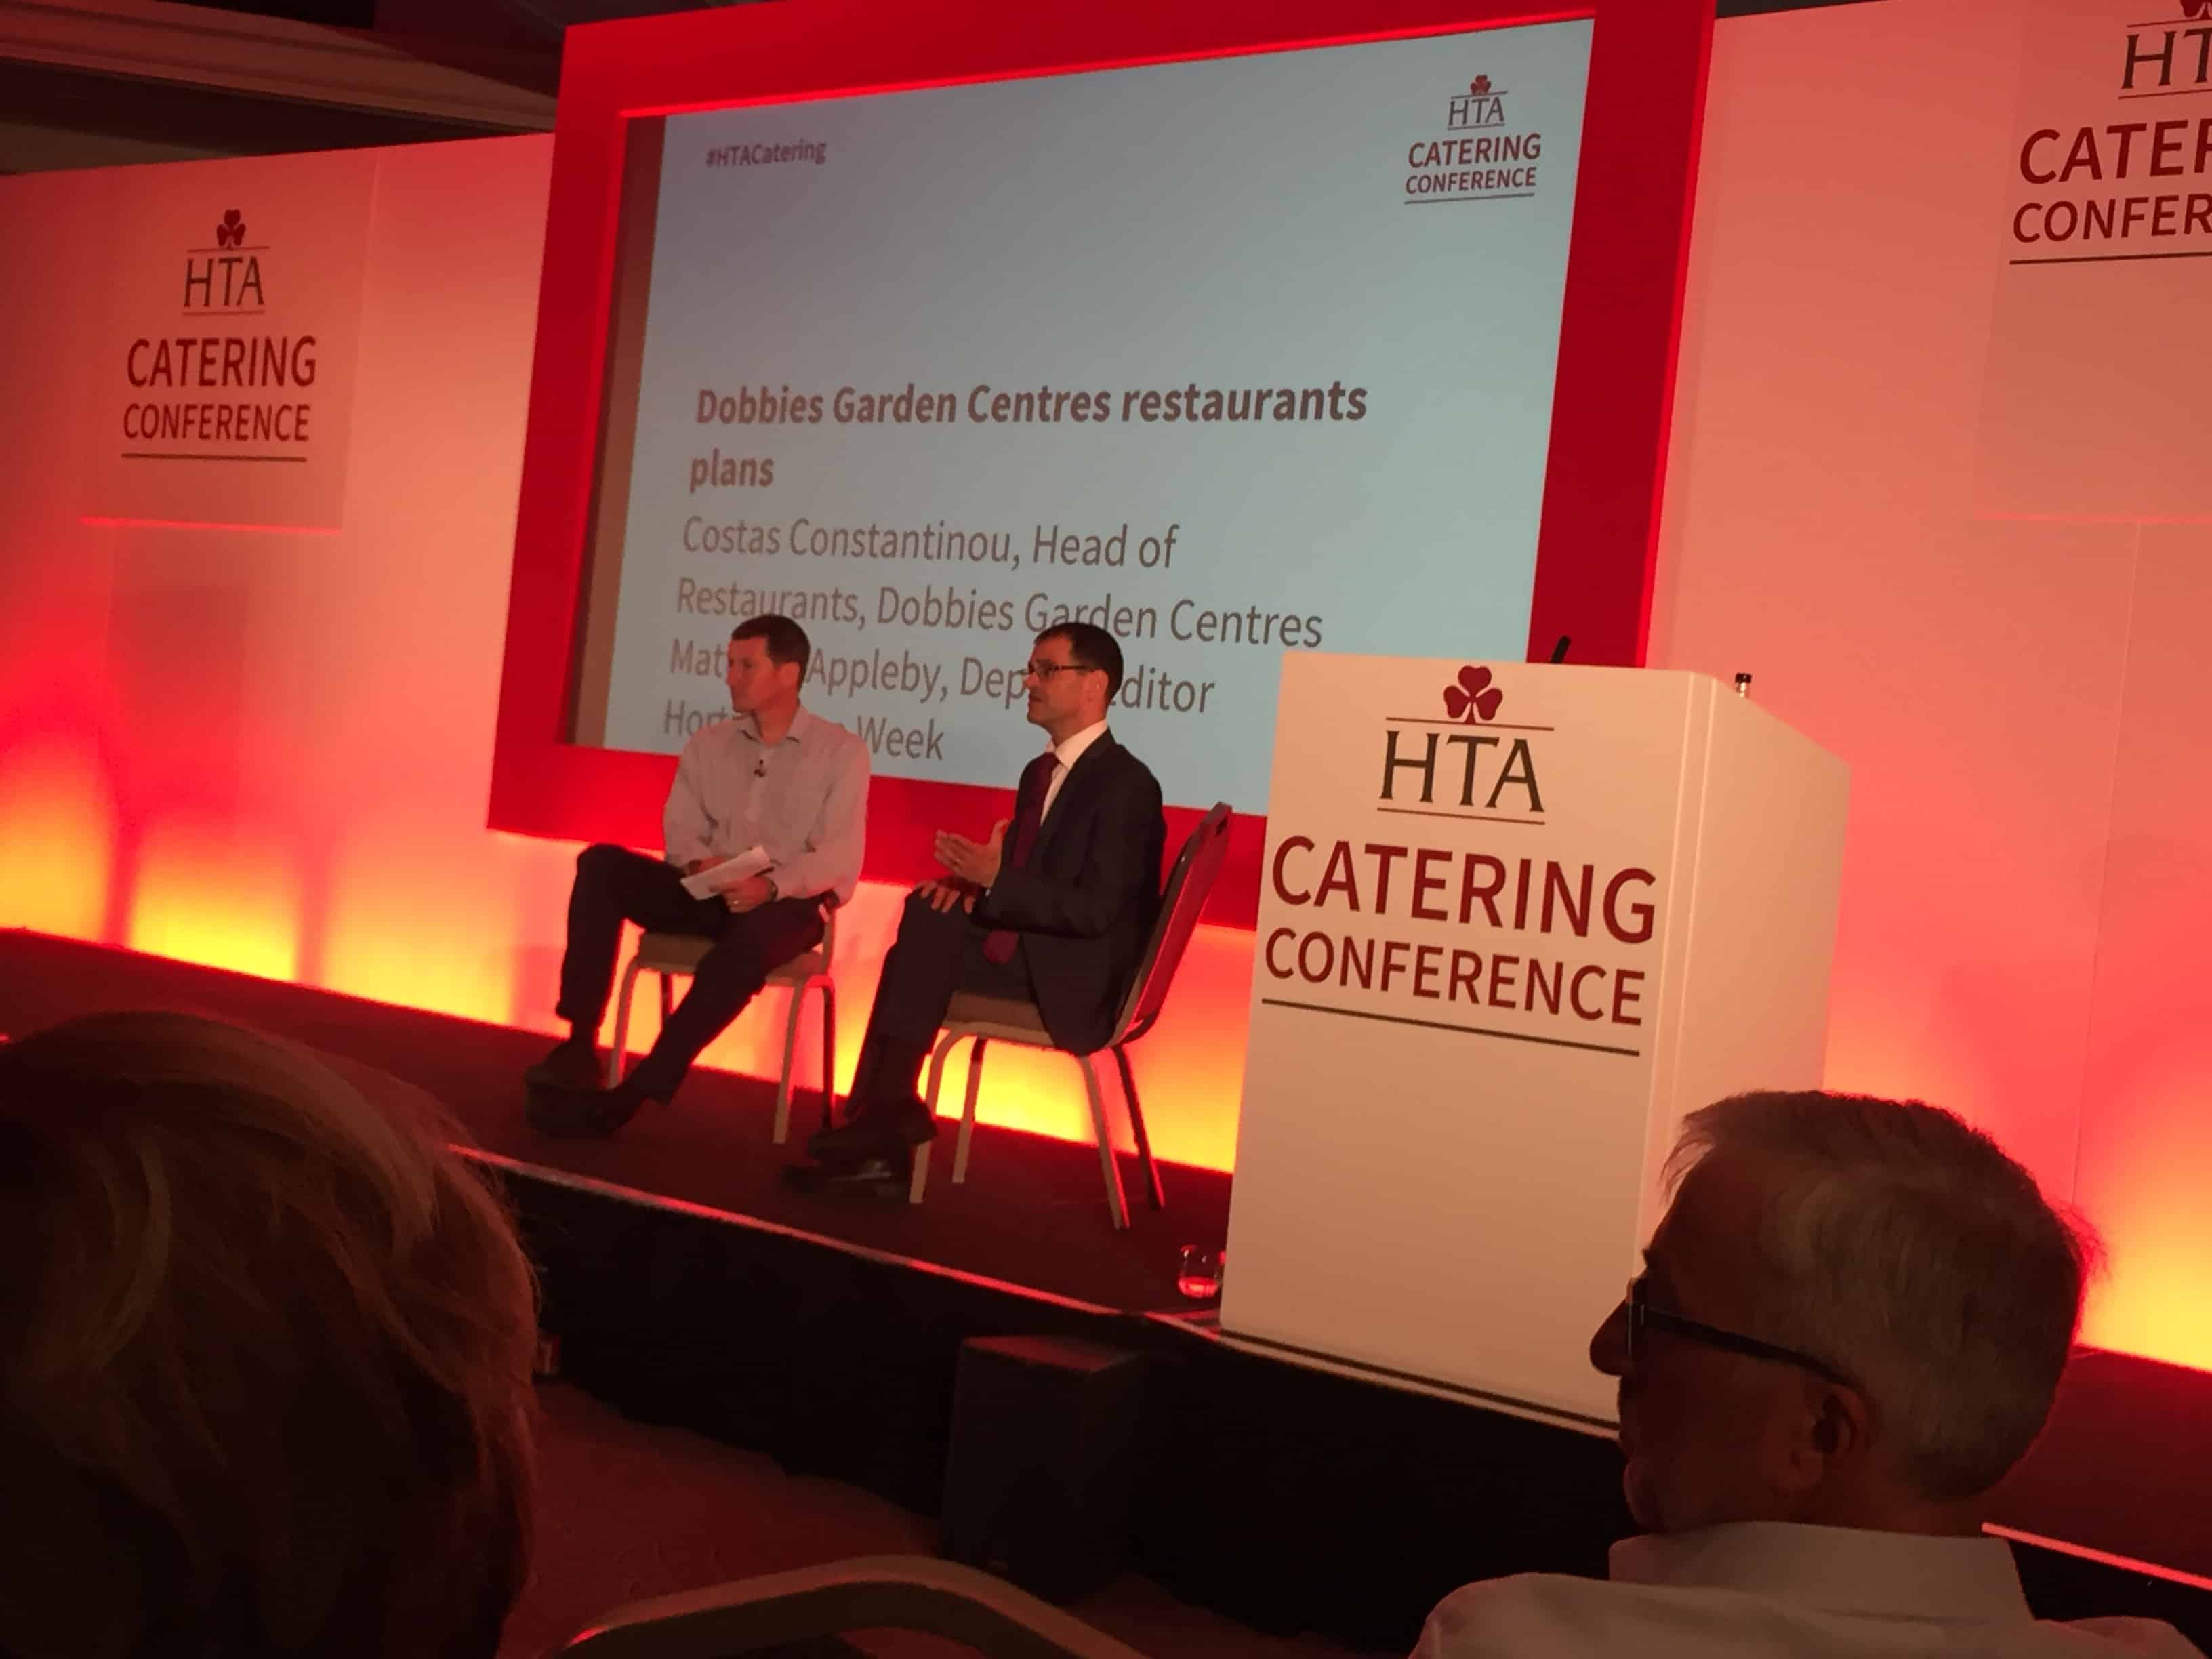 HTA Catering Conference